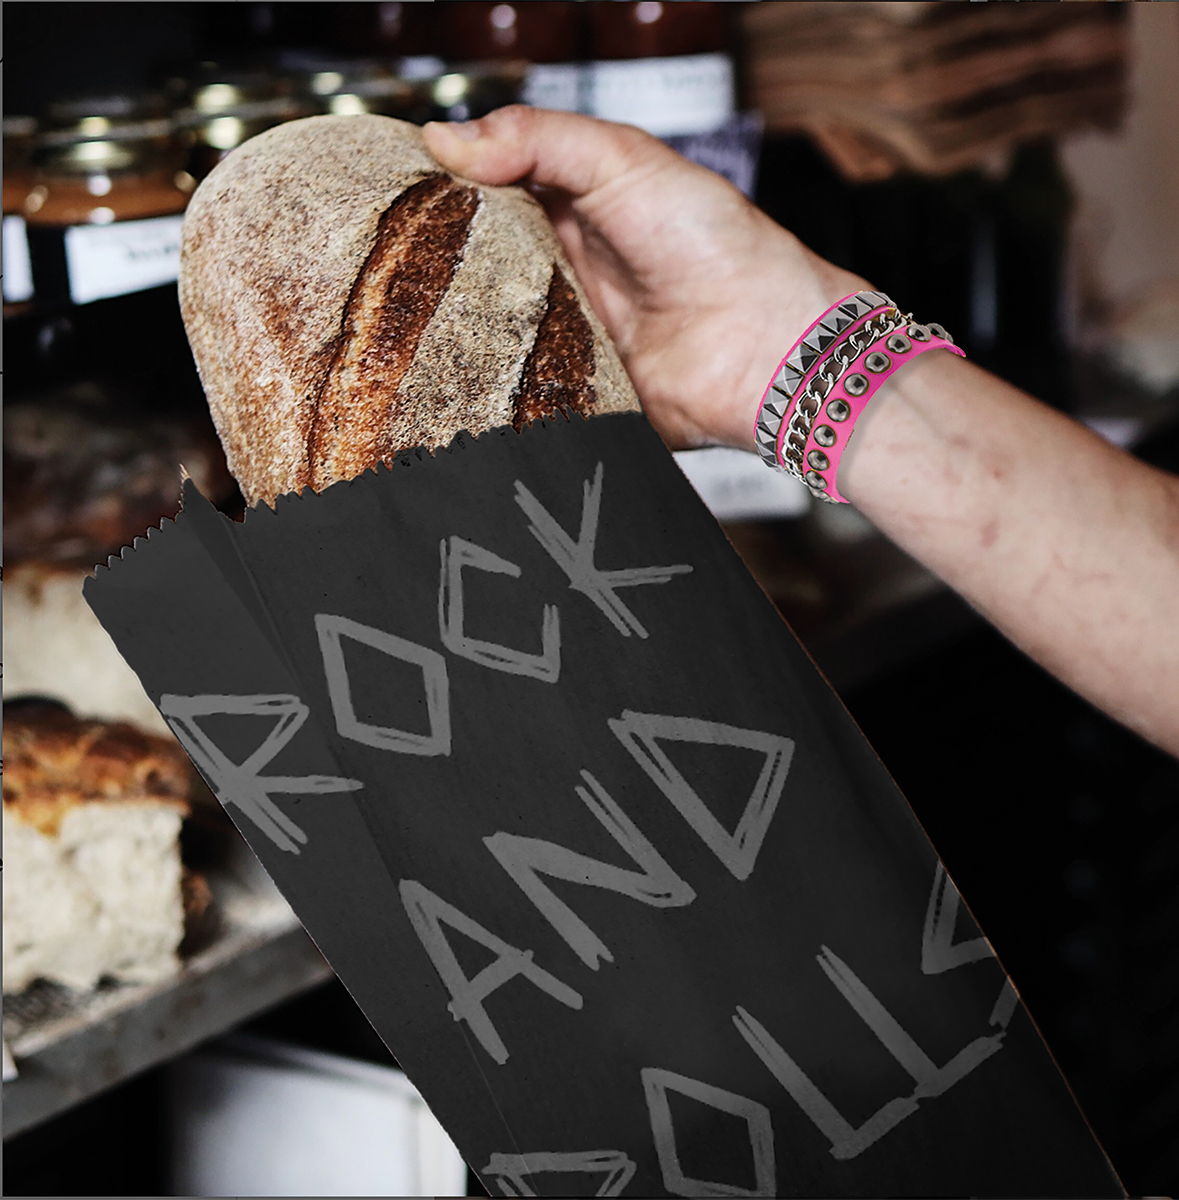 image of bread in a black bag that says rock and rolls.